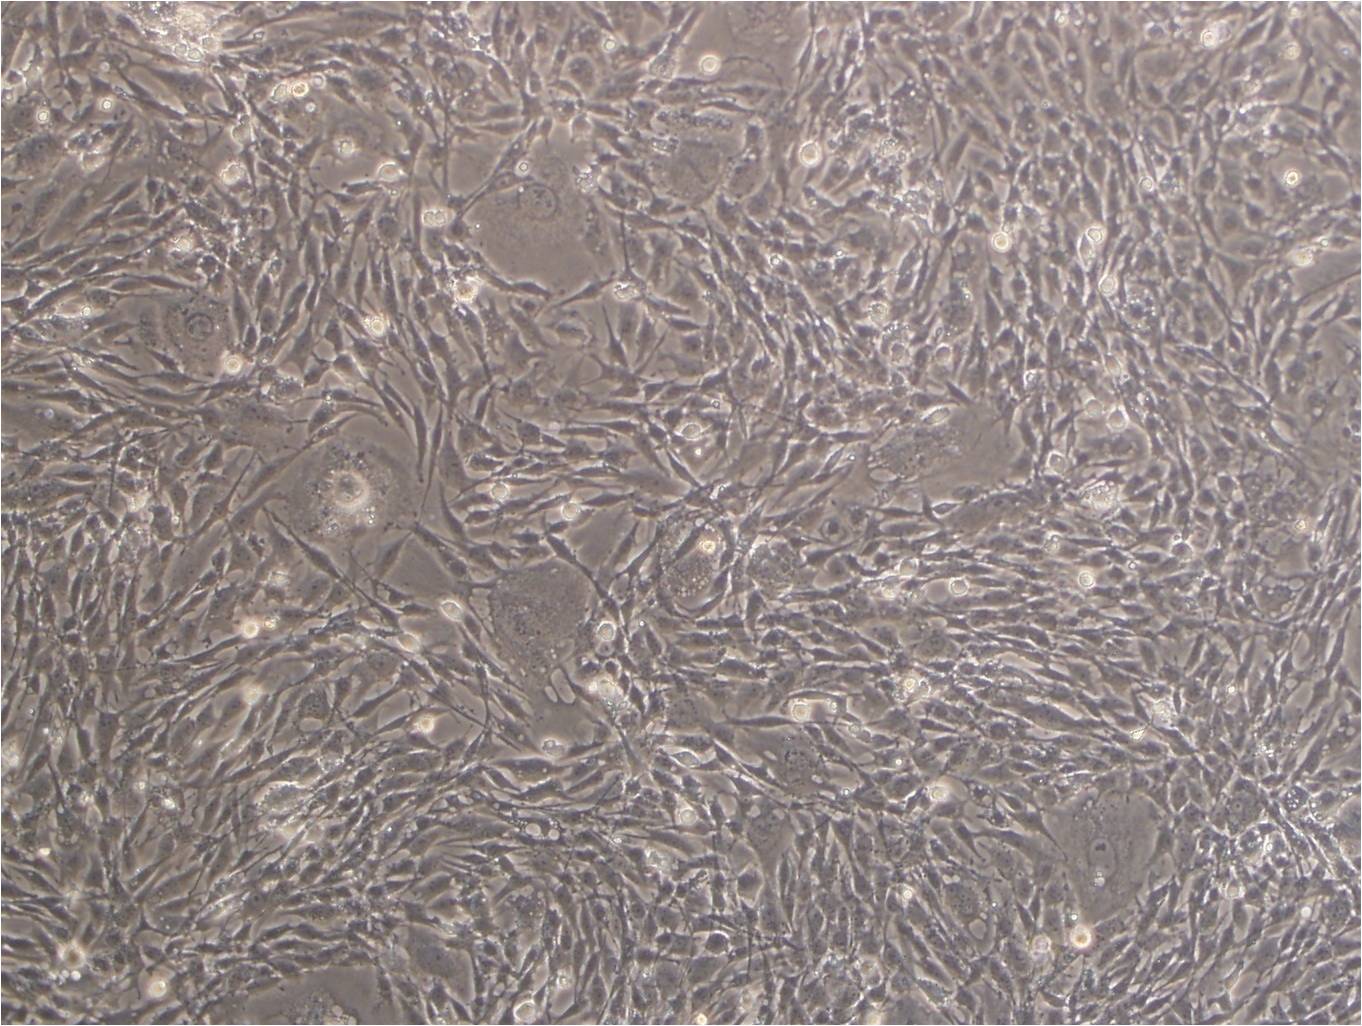 L-02 epithelioid cells人肝细胞系,L-02 epithelioid cells